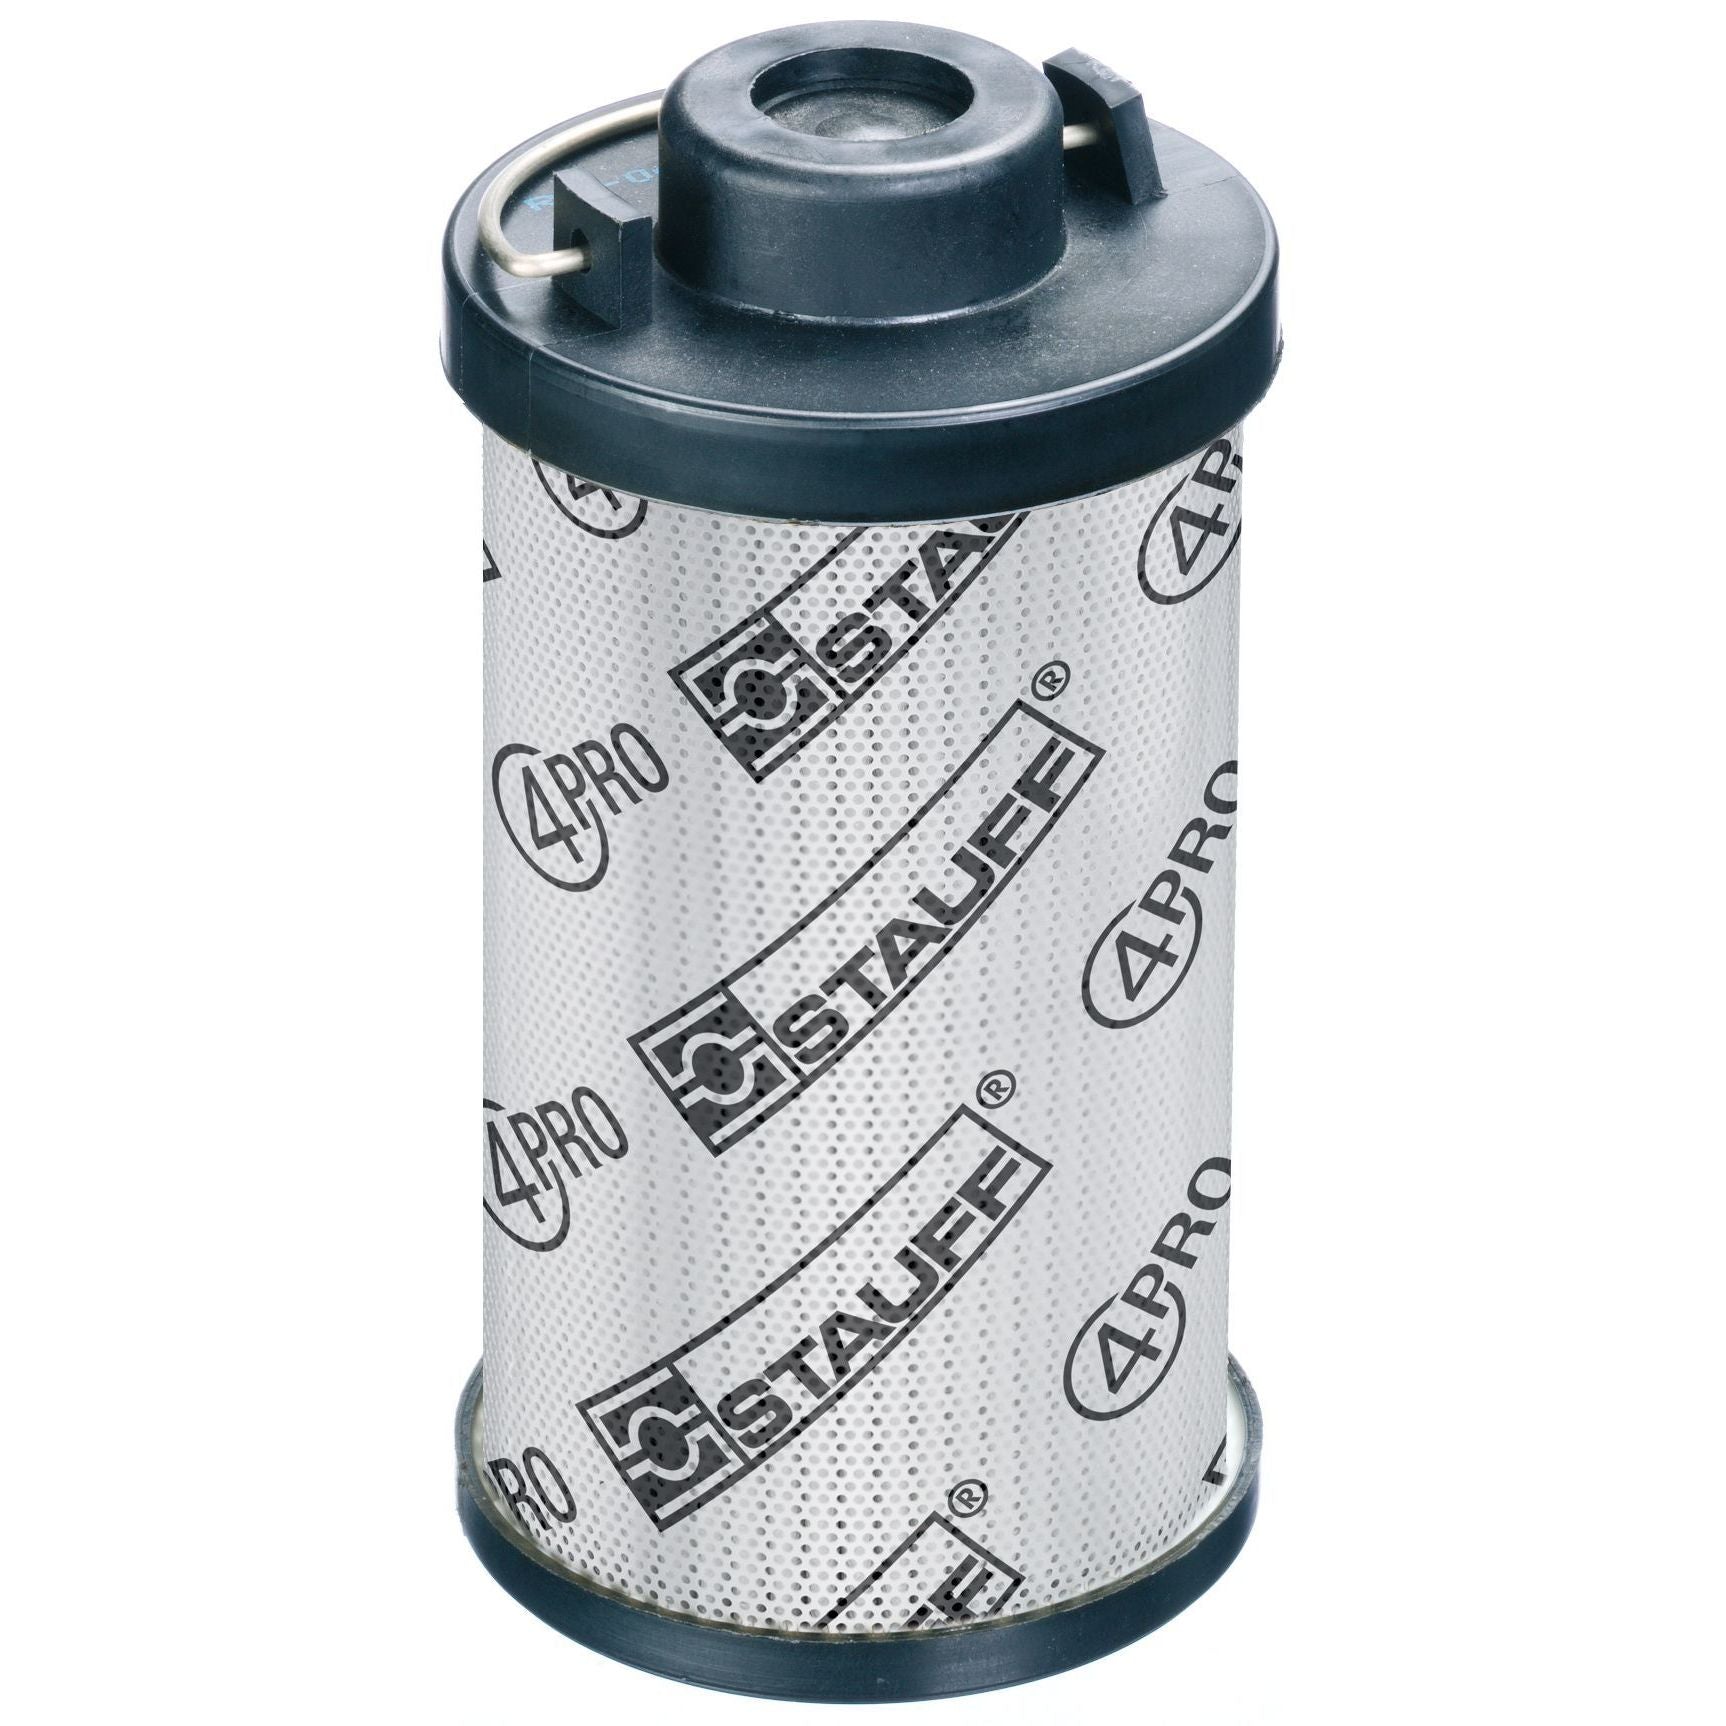 RE-070-A-10-B/3 : Stauff RF-070 Series Filter Element, 10 Micron, Stainless Fiber Media, 435psi Collapse Differential, Buna